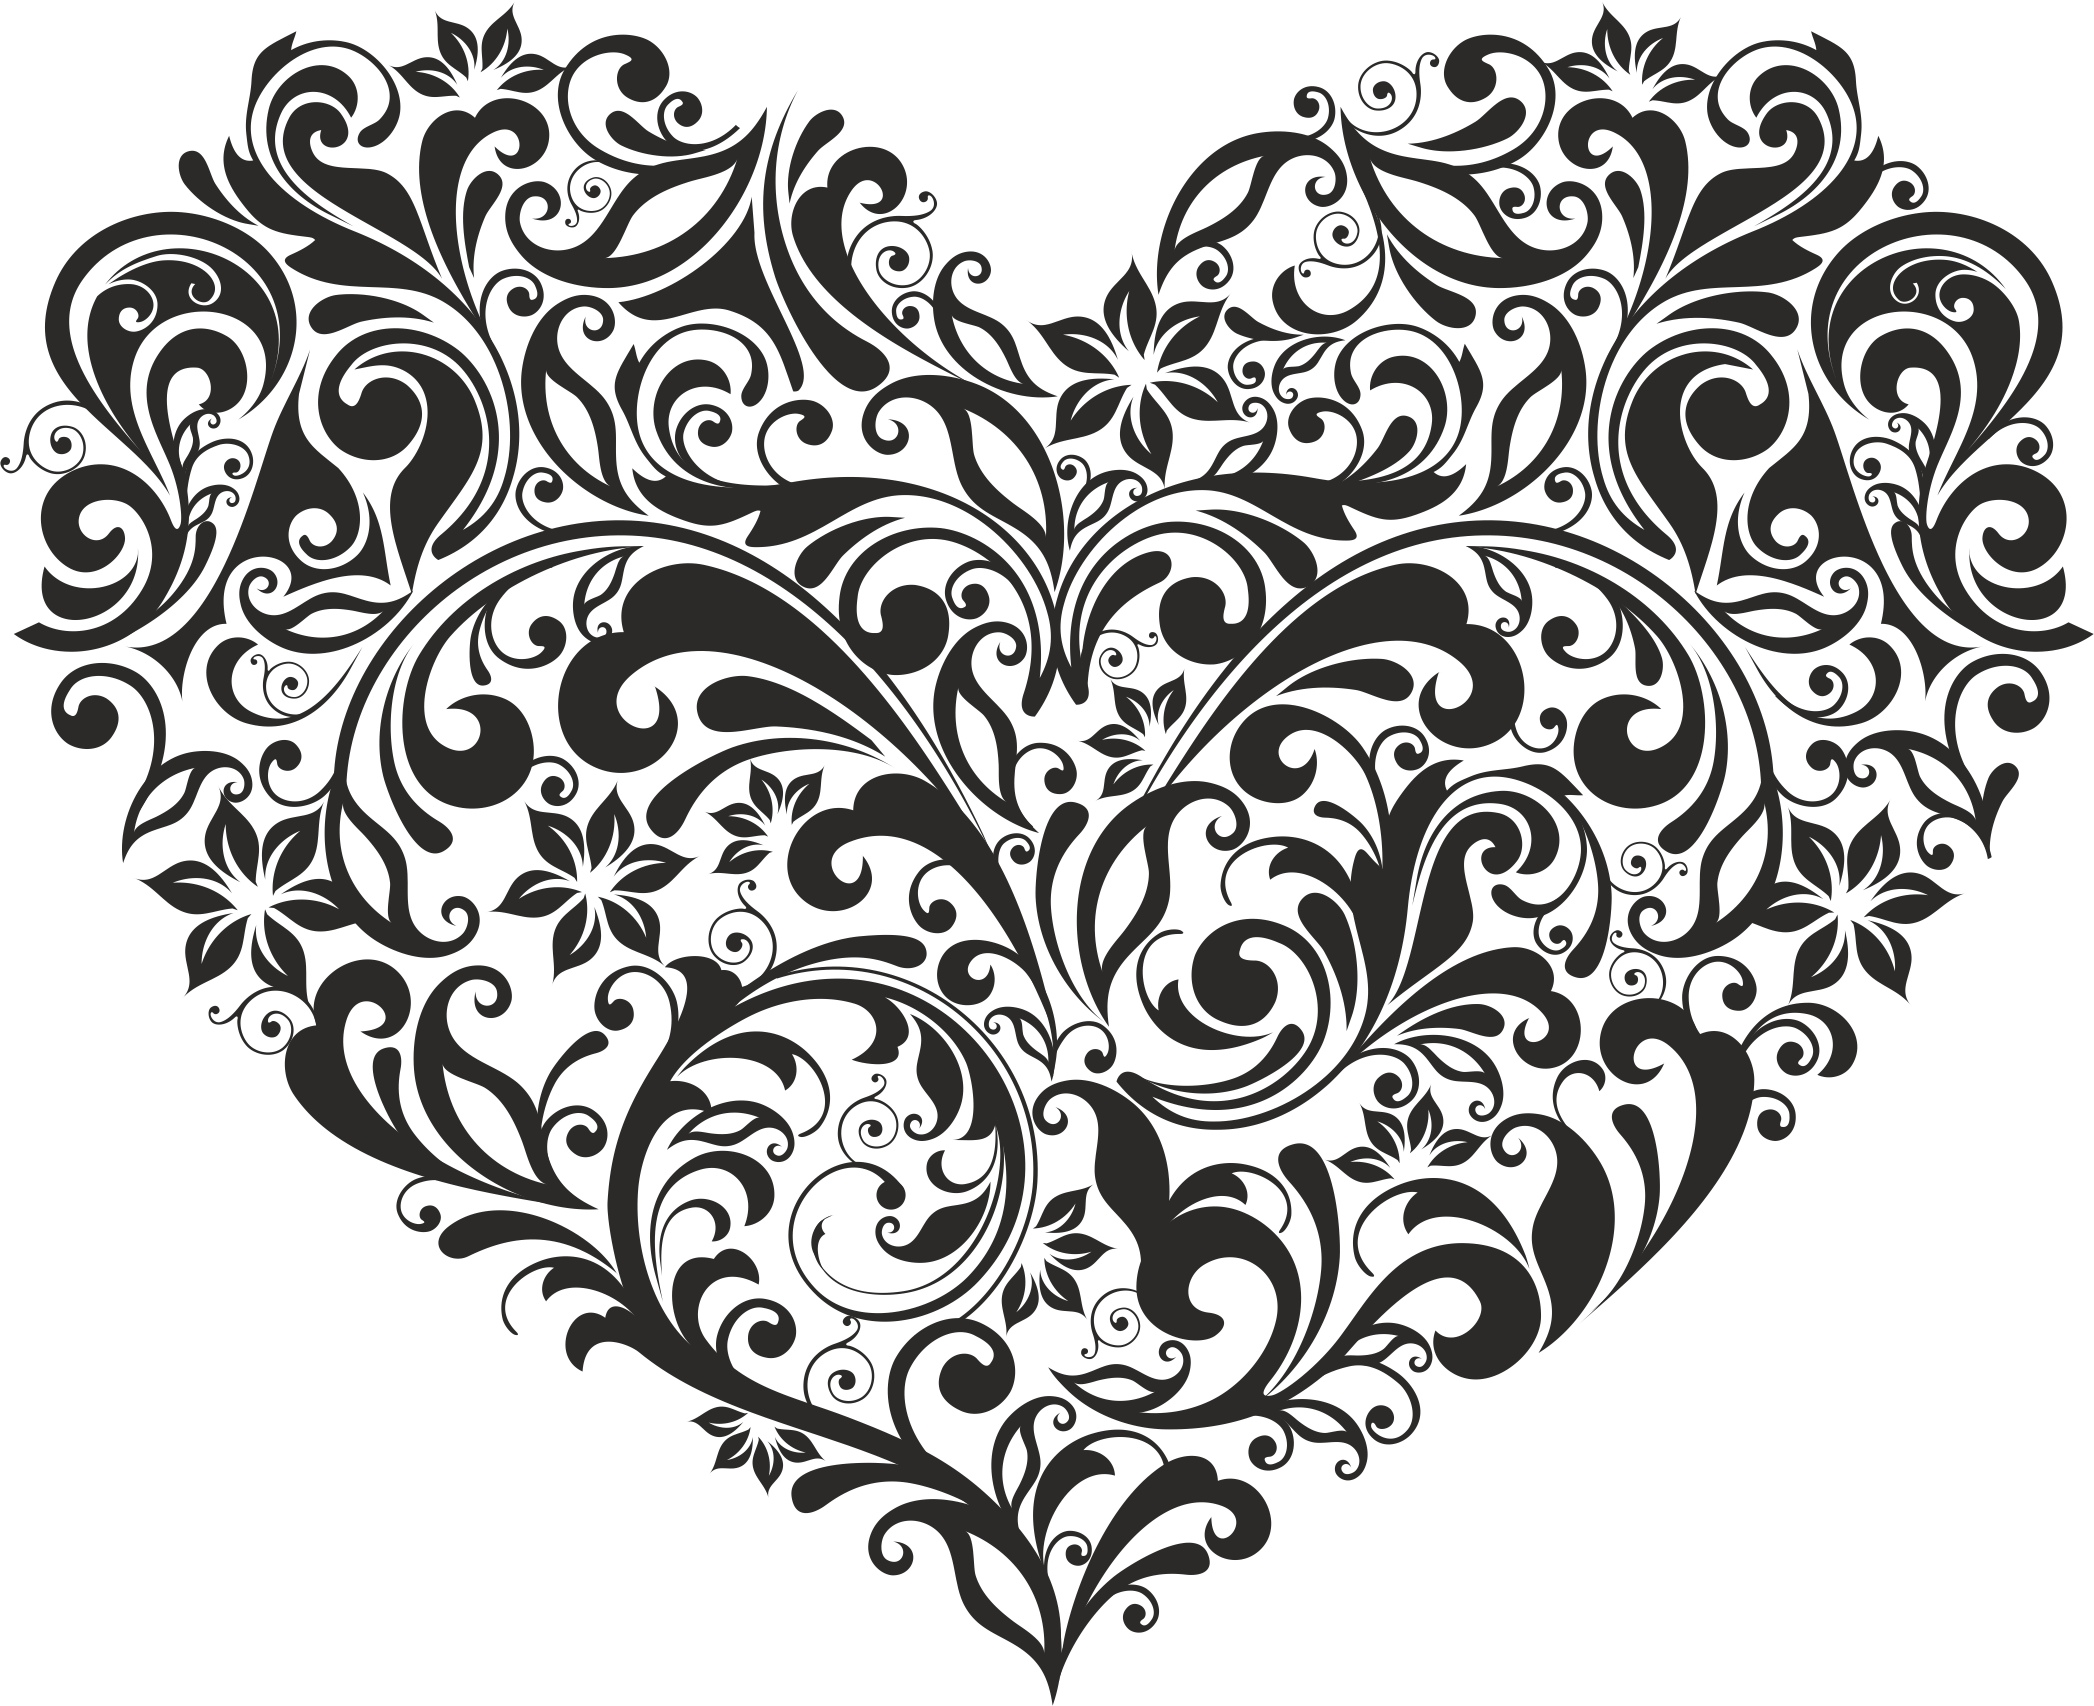 Ornament Heart Free Vector cdr Download - 3axis.co